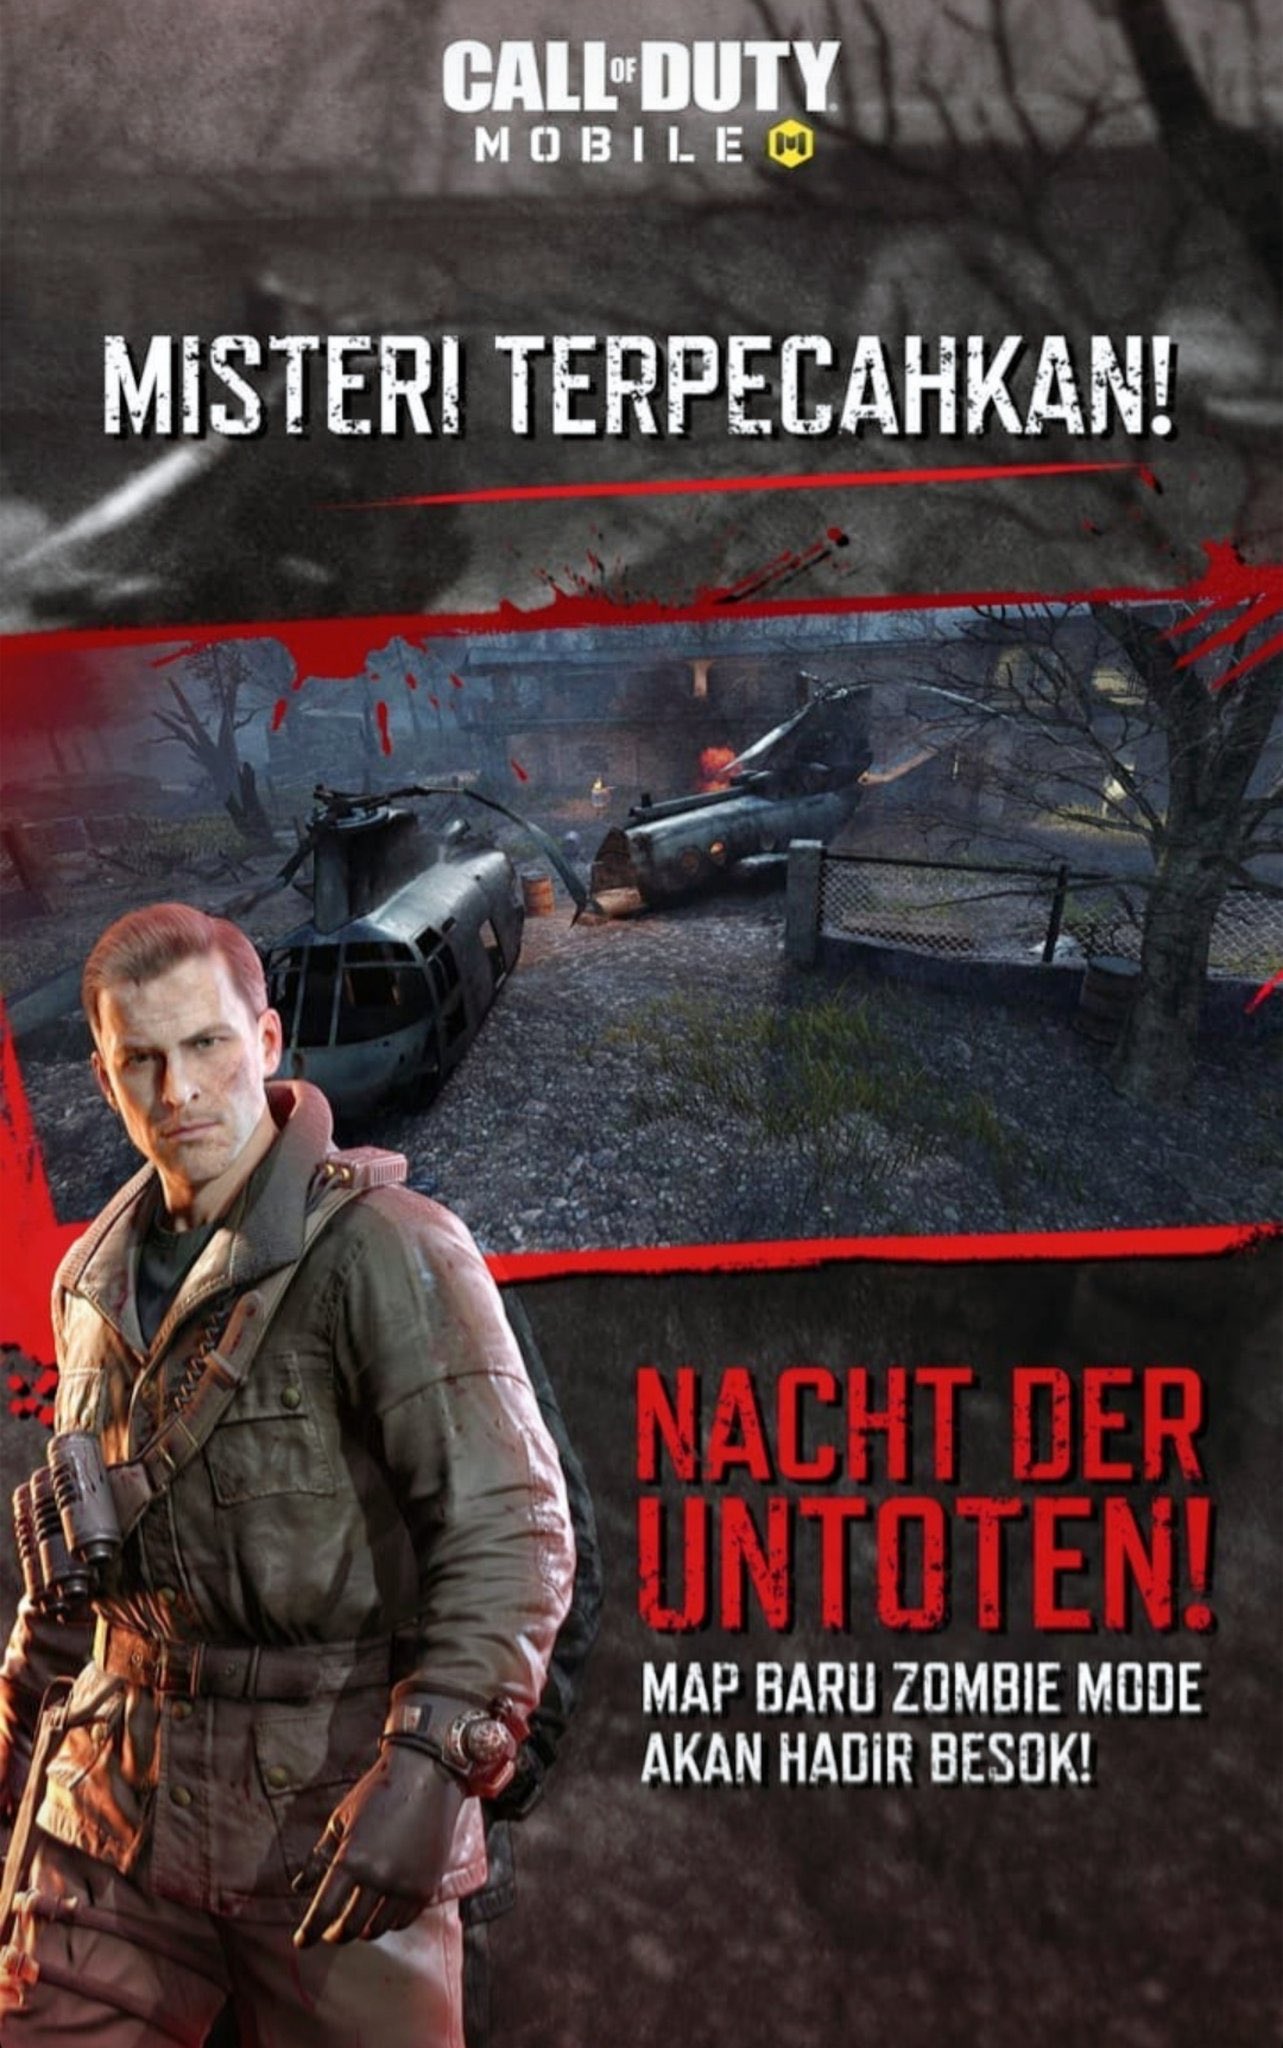 Cod Mobile News Leaks Nacht Der Untoten Is Coming Tomorrow To Garena Codmobile T Co Rylctxglst Twitter